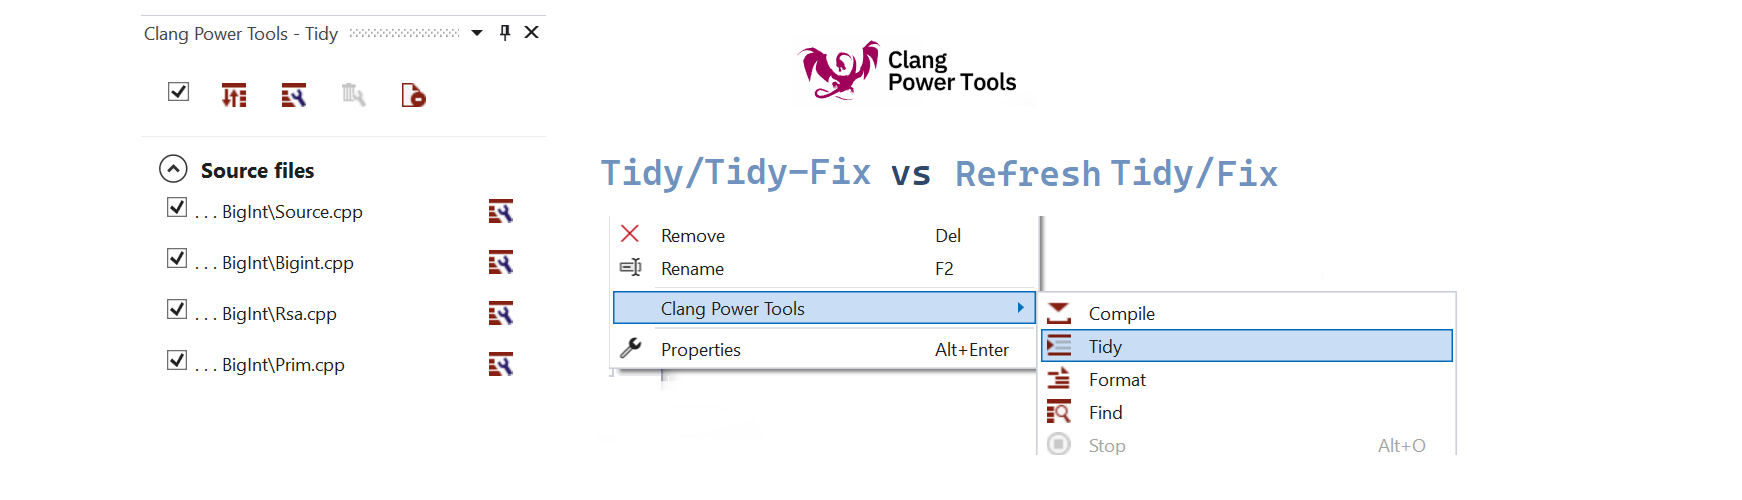 Mange Extension - Clang Power Tools